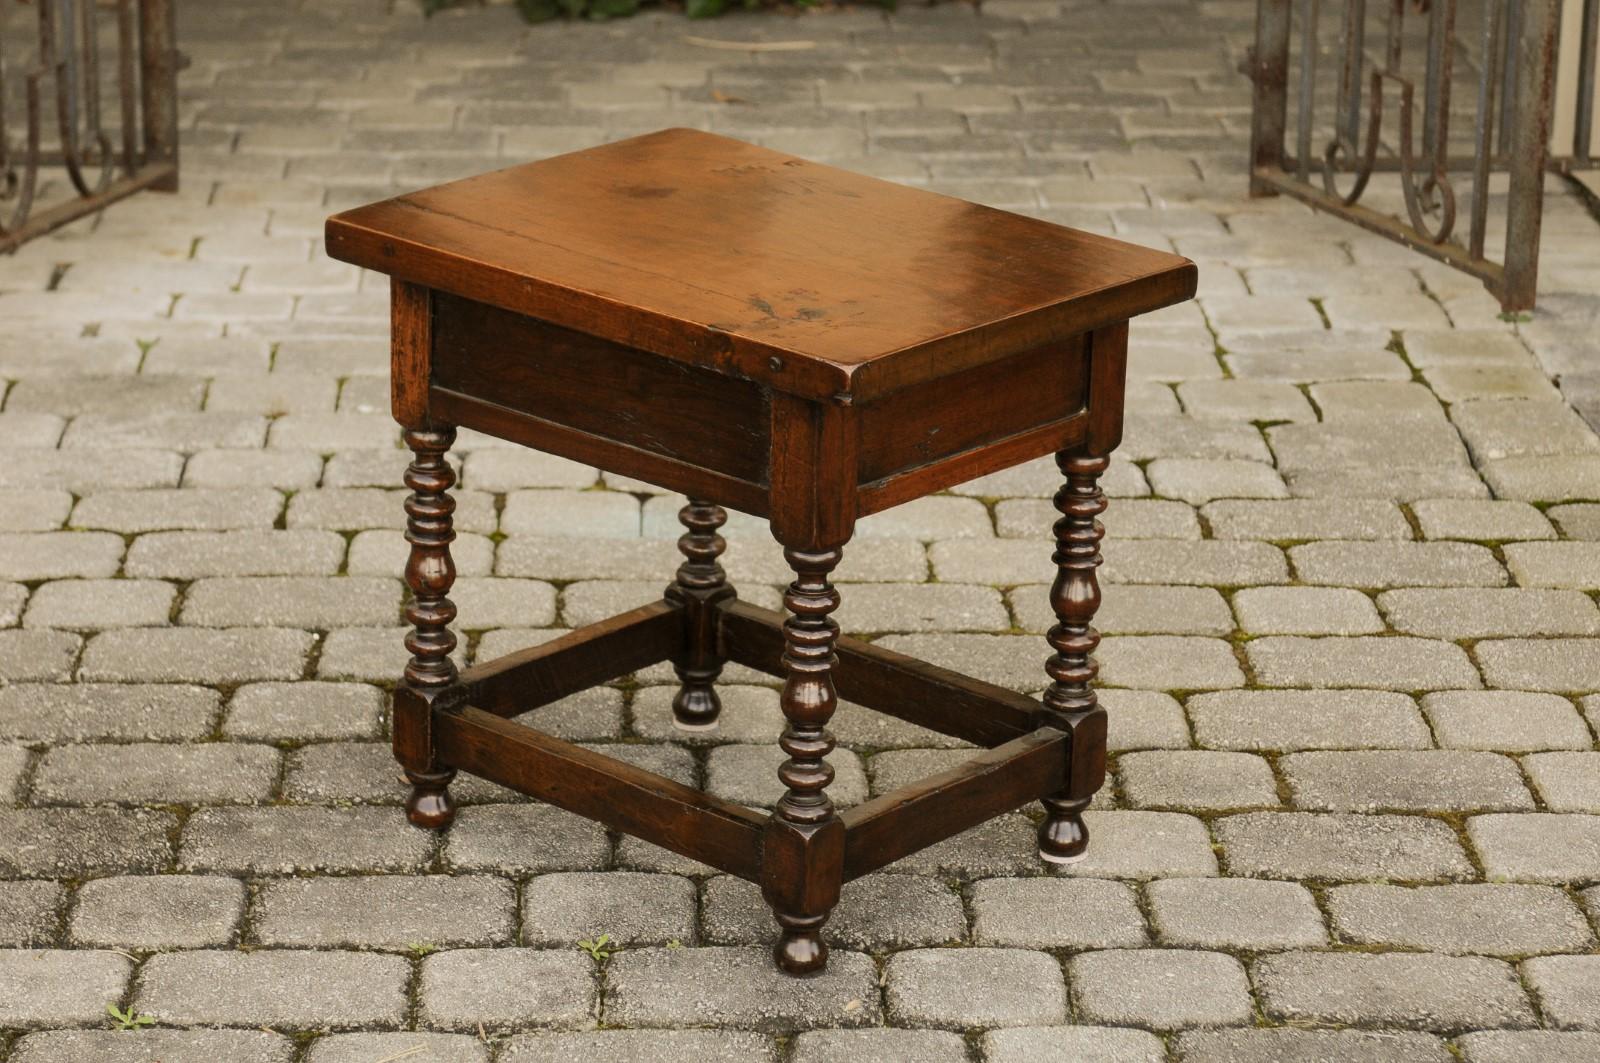 Italian 1900s Walnut Side Table with Drawer, Carved Rosettes and Turned Legs For Sale 4